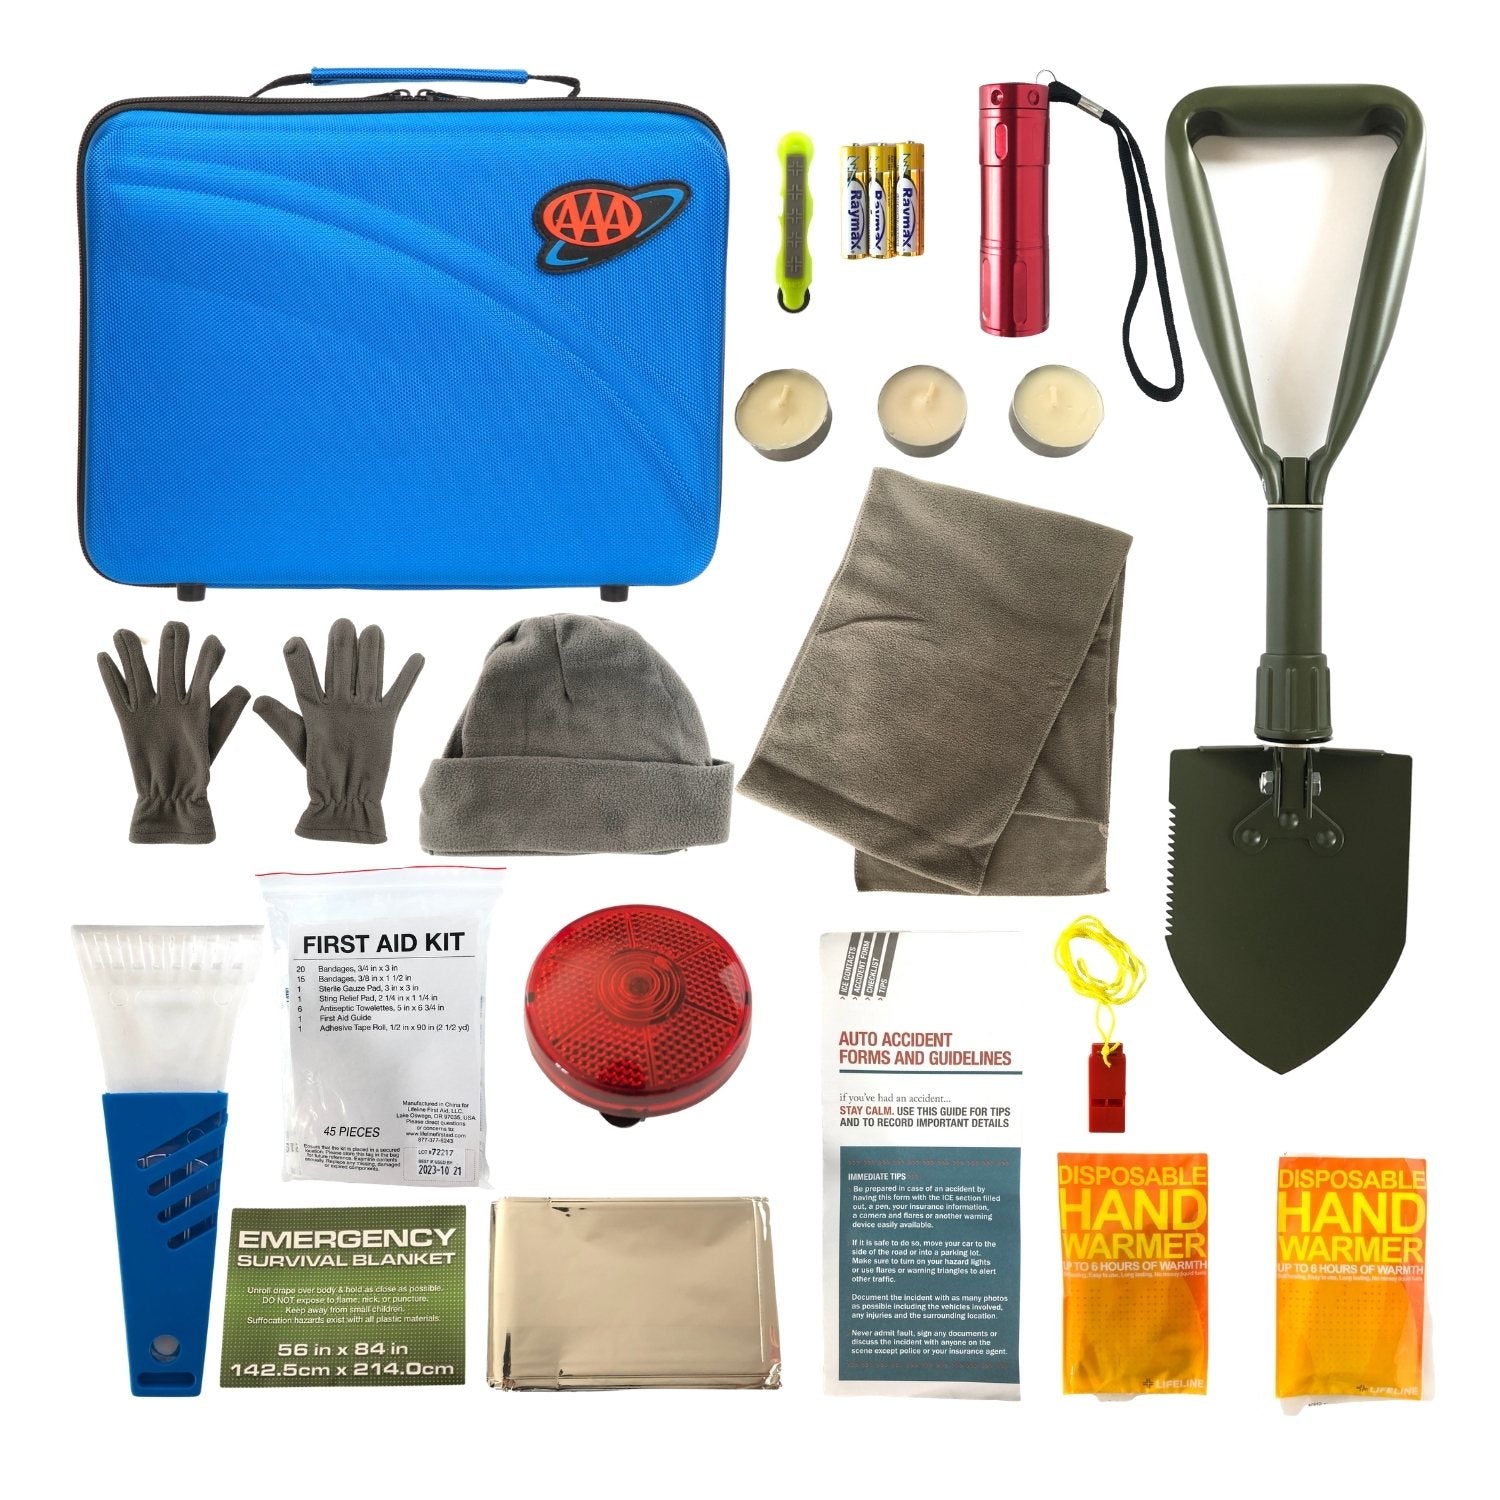 Top 10 Things You Need in Your Car Emergency Kit - Defensive Driving